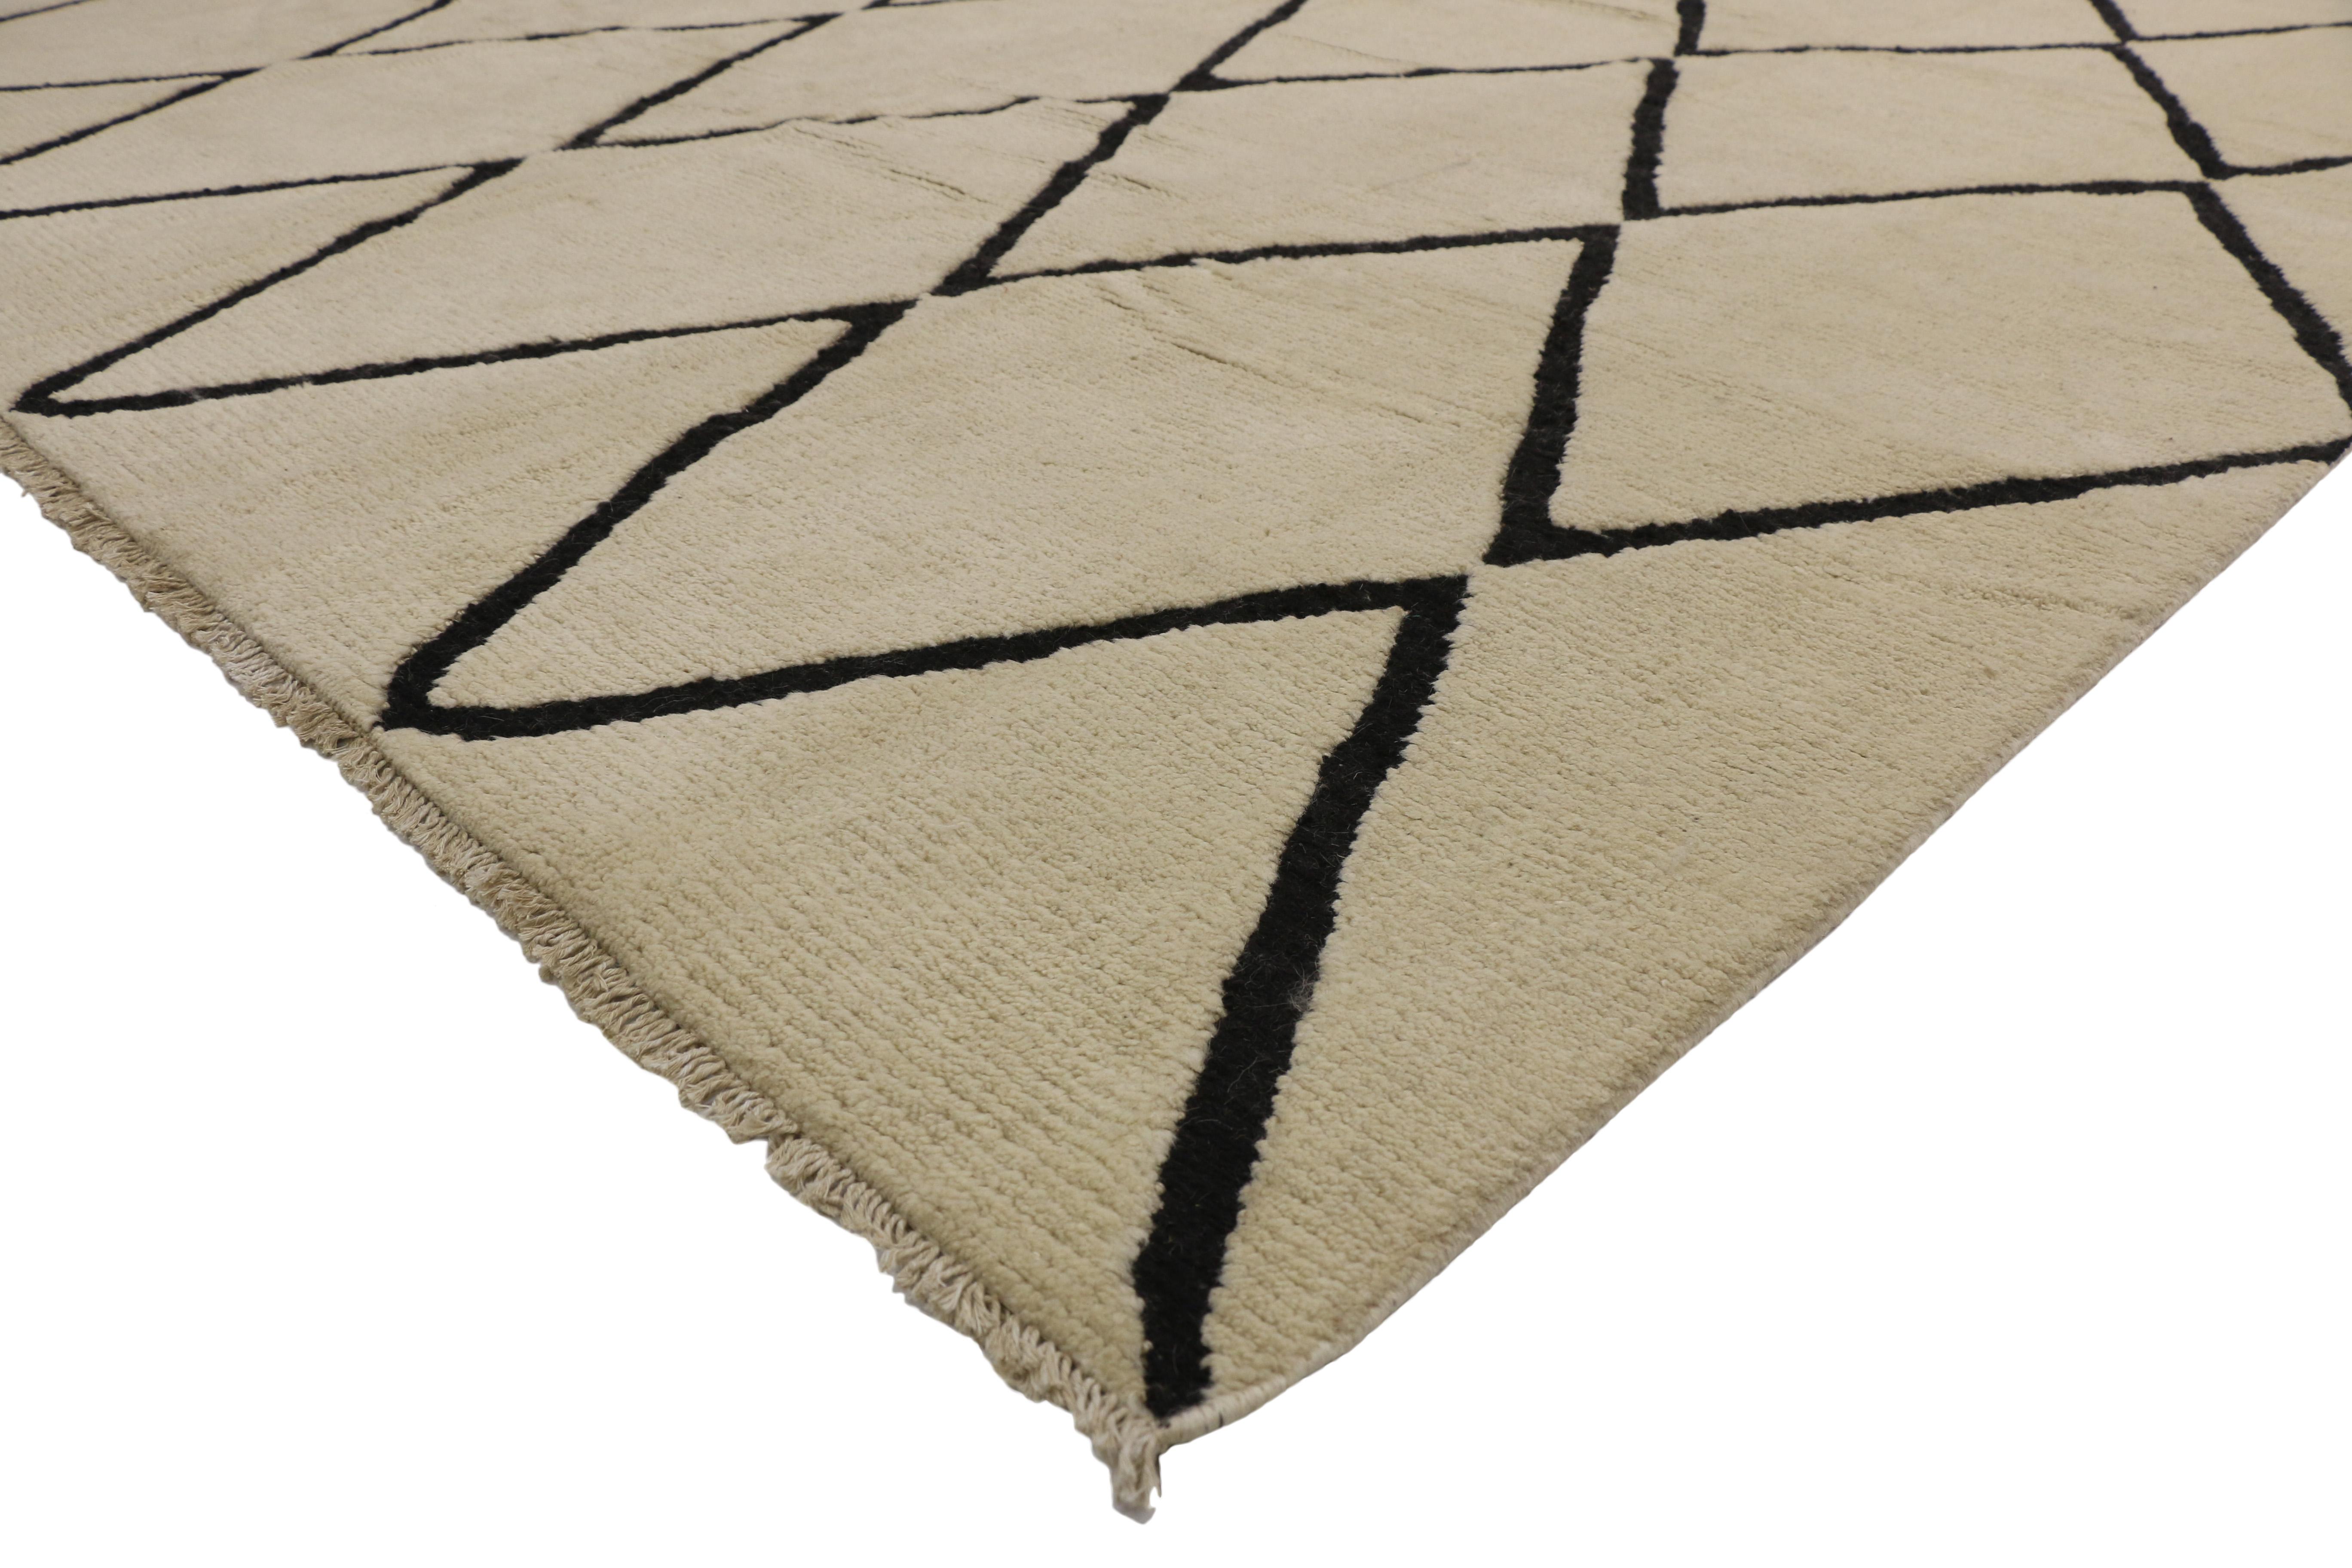 80517 New Contemporary Moroccan Area Rug with Modernist Stylen style. This hand knotted wool contemporary Moroccan area rug features contrasting black lines running the length of the sandy-beige backdrop. The thin black lines criss-cross in an